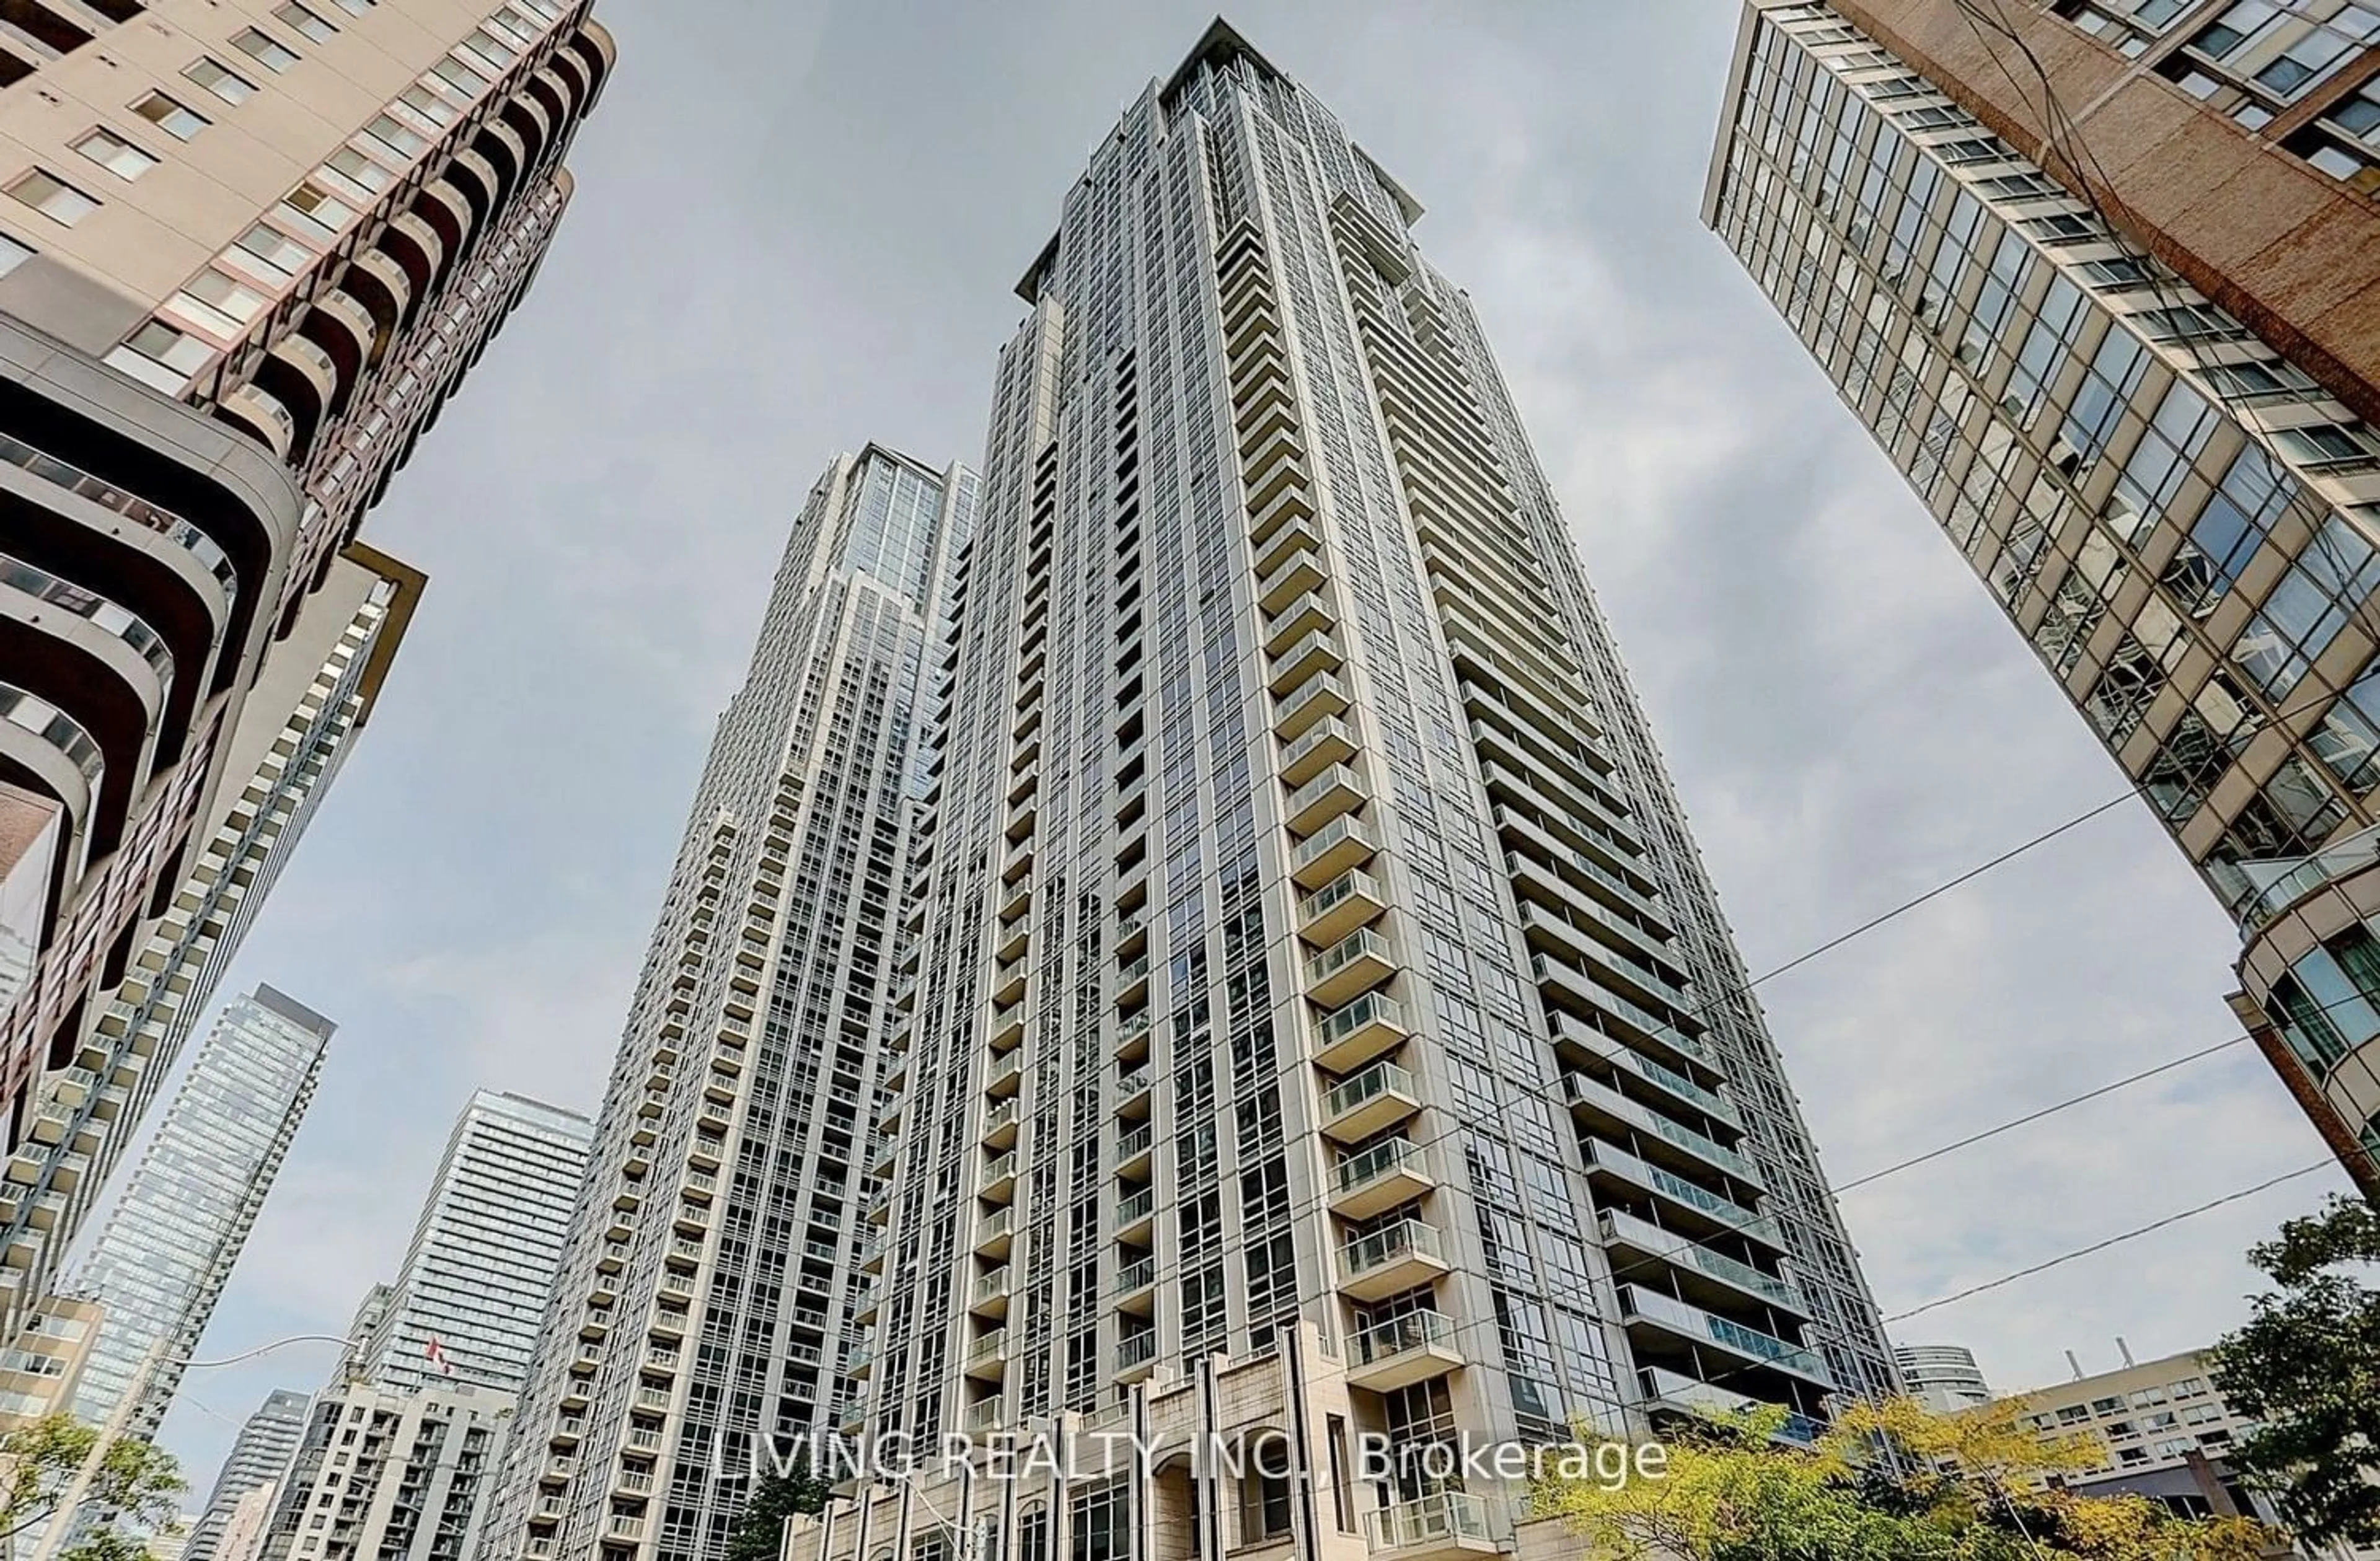 A pic from exterior of the house or condo for 761 Bay St #3212, Toronto Ontario M5G 2R2